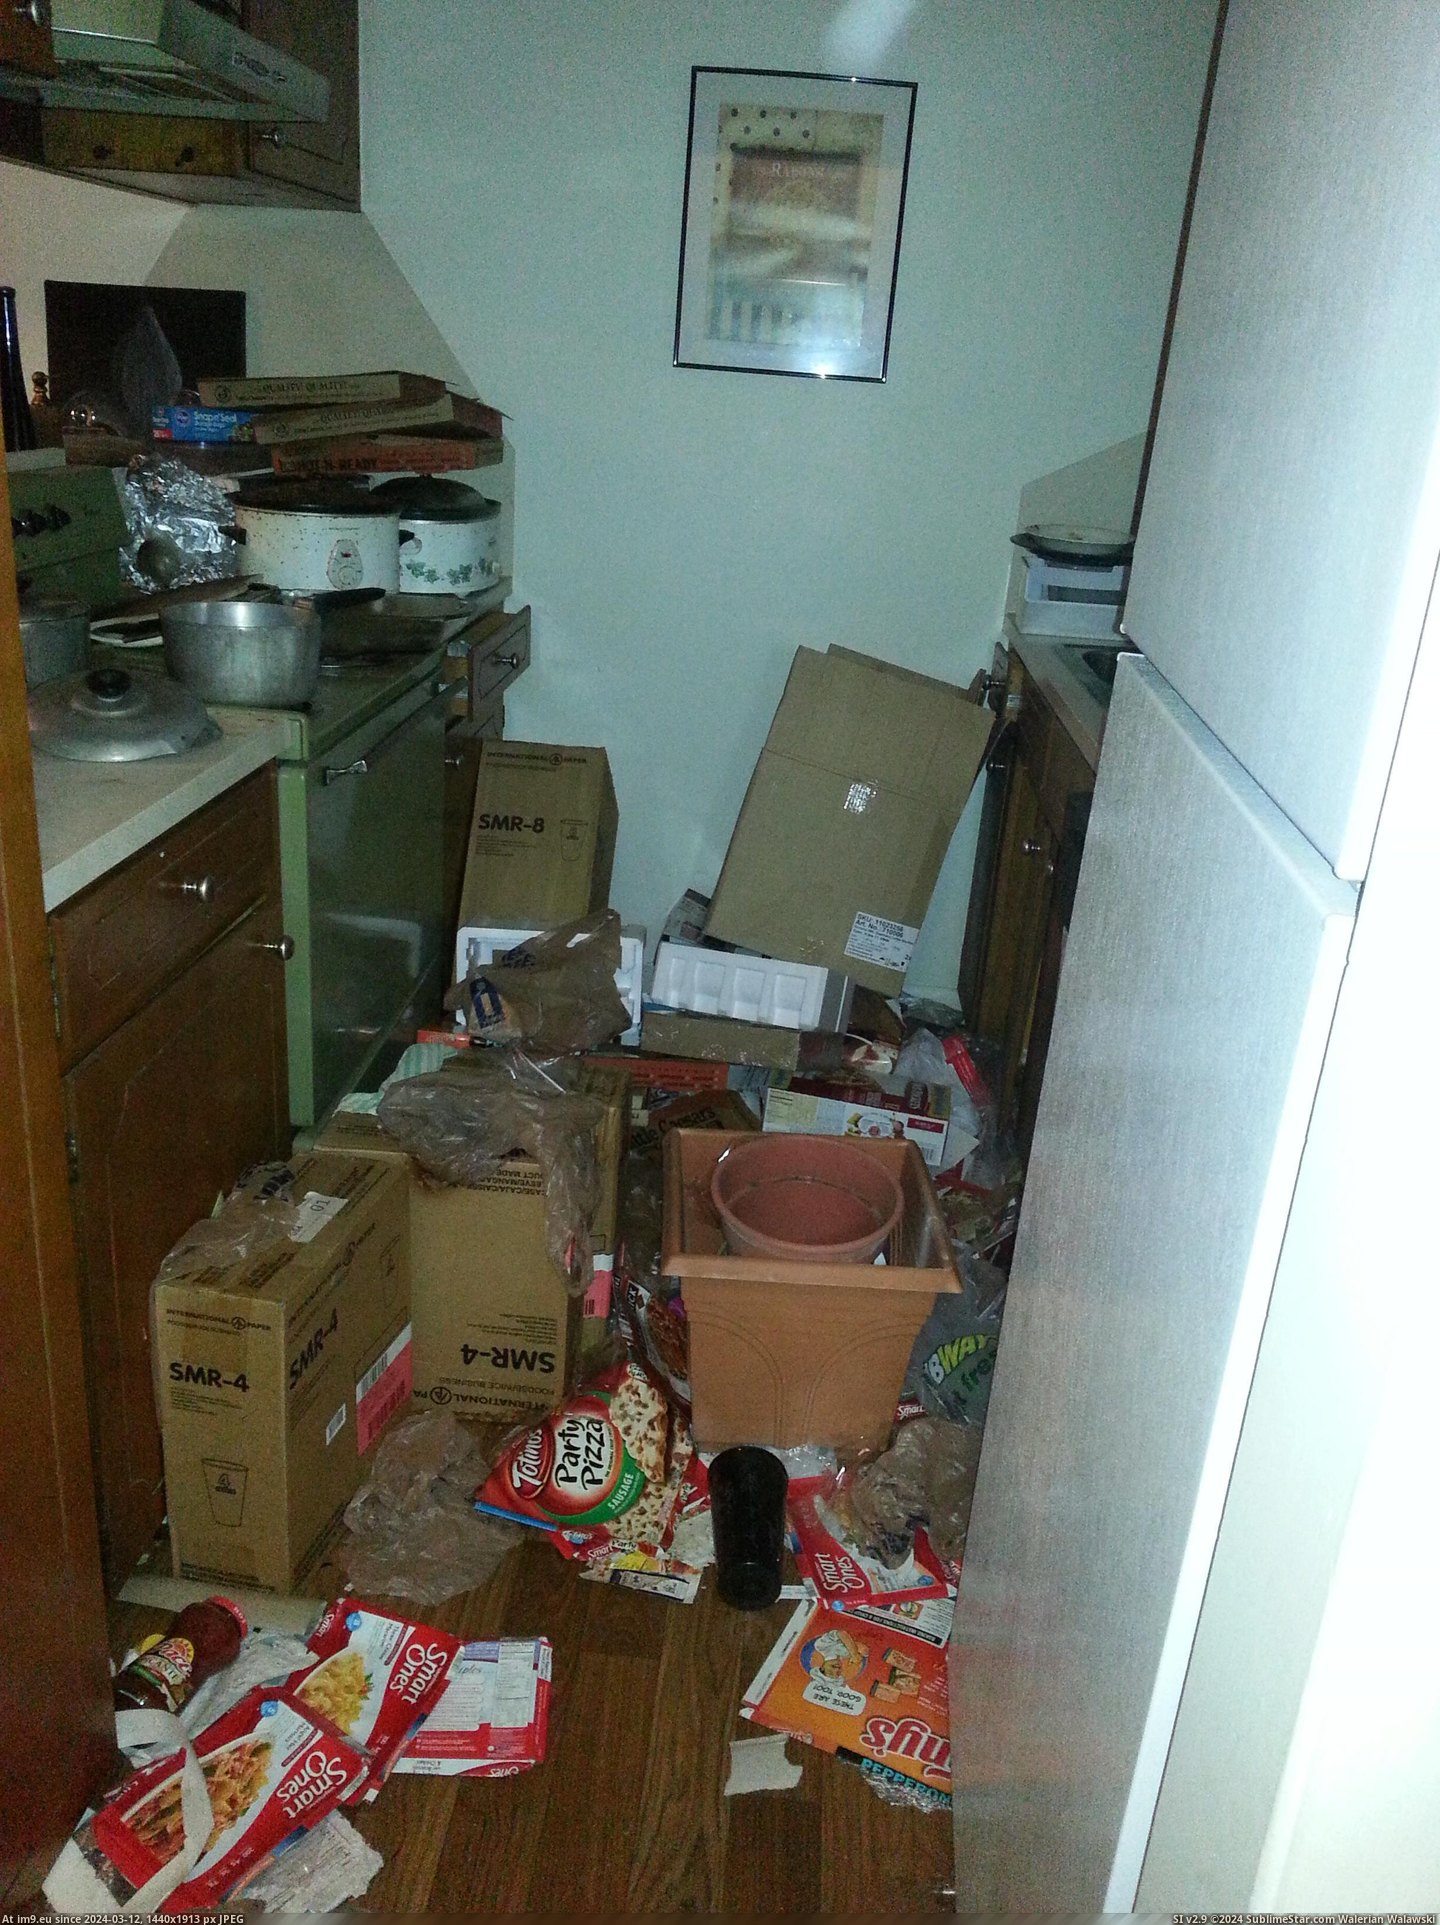 #For #Had #Bit #Brother #Apartment #Drove #Funk #Called #Hours #Walk #Clean [Pics] My brother had been in a bit of a funk. He called me for help to clean his apartment. I drove 4 hours to walk into this.  Pic. (Изображение из альбом My r/PICS favs))